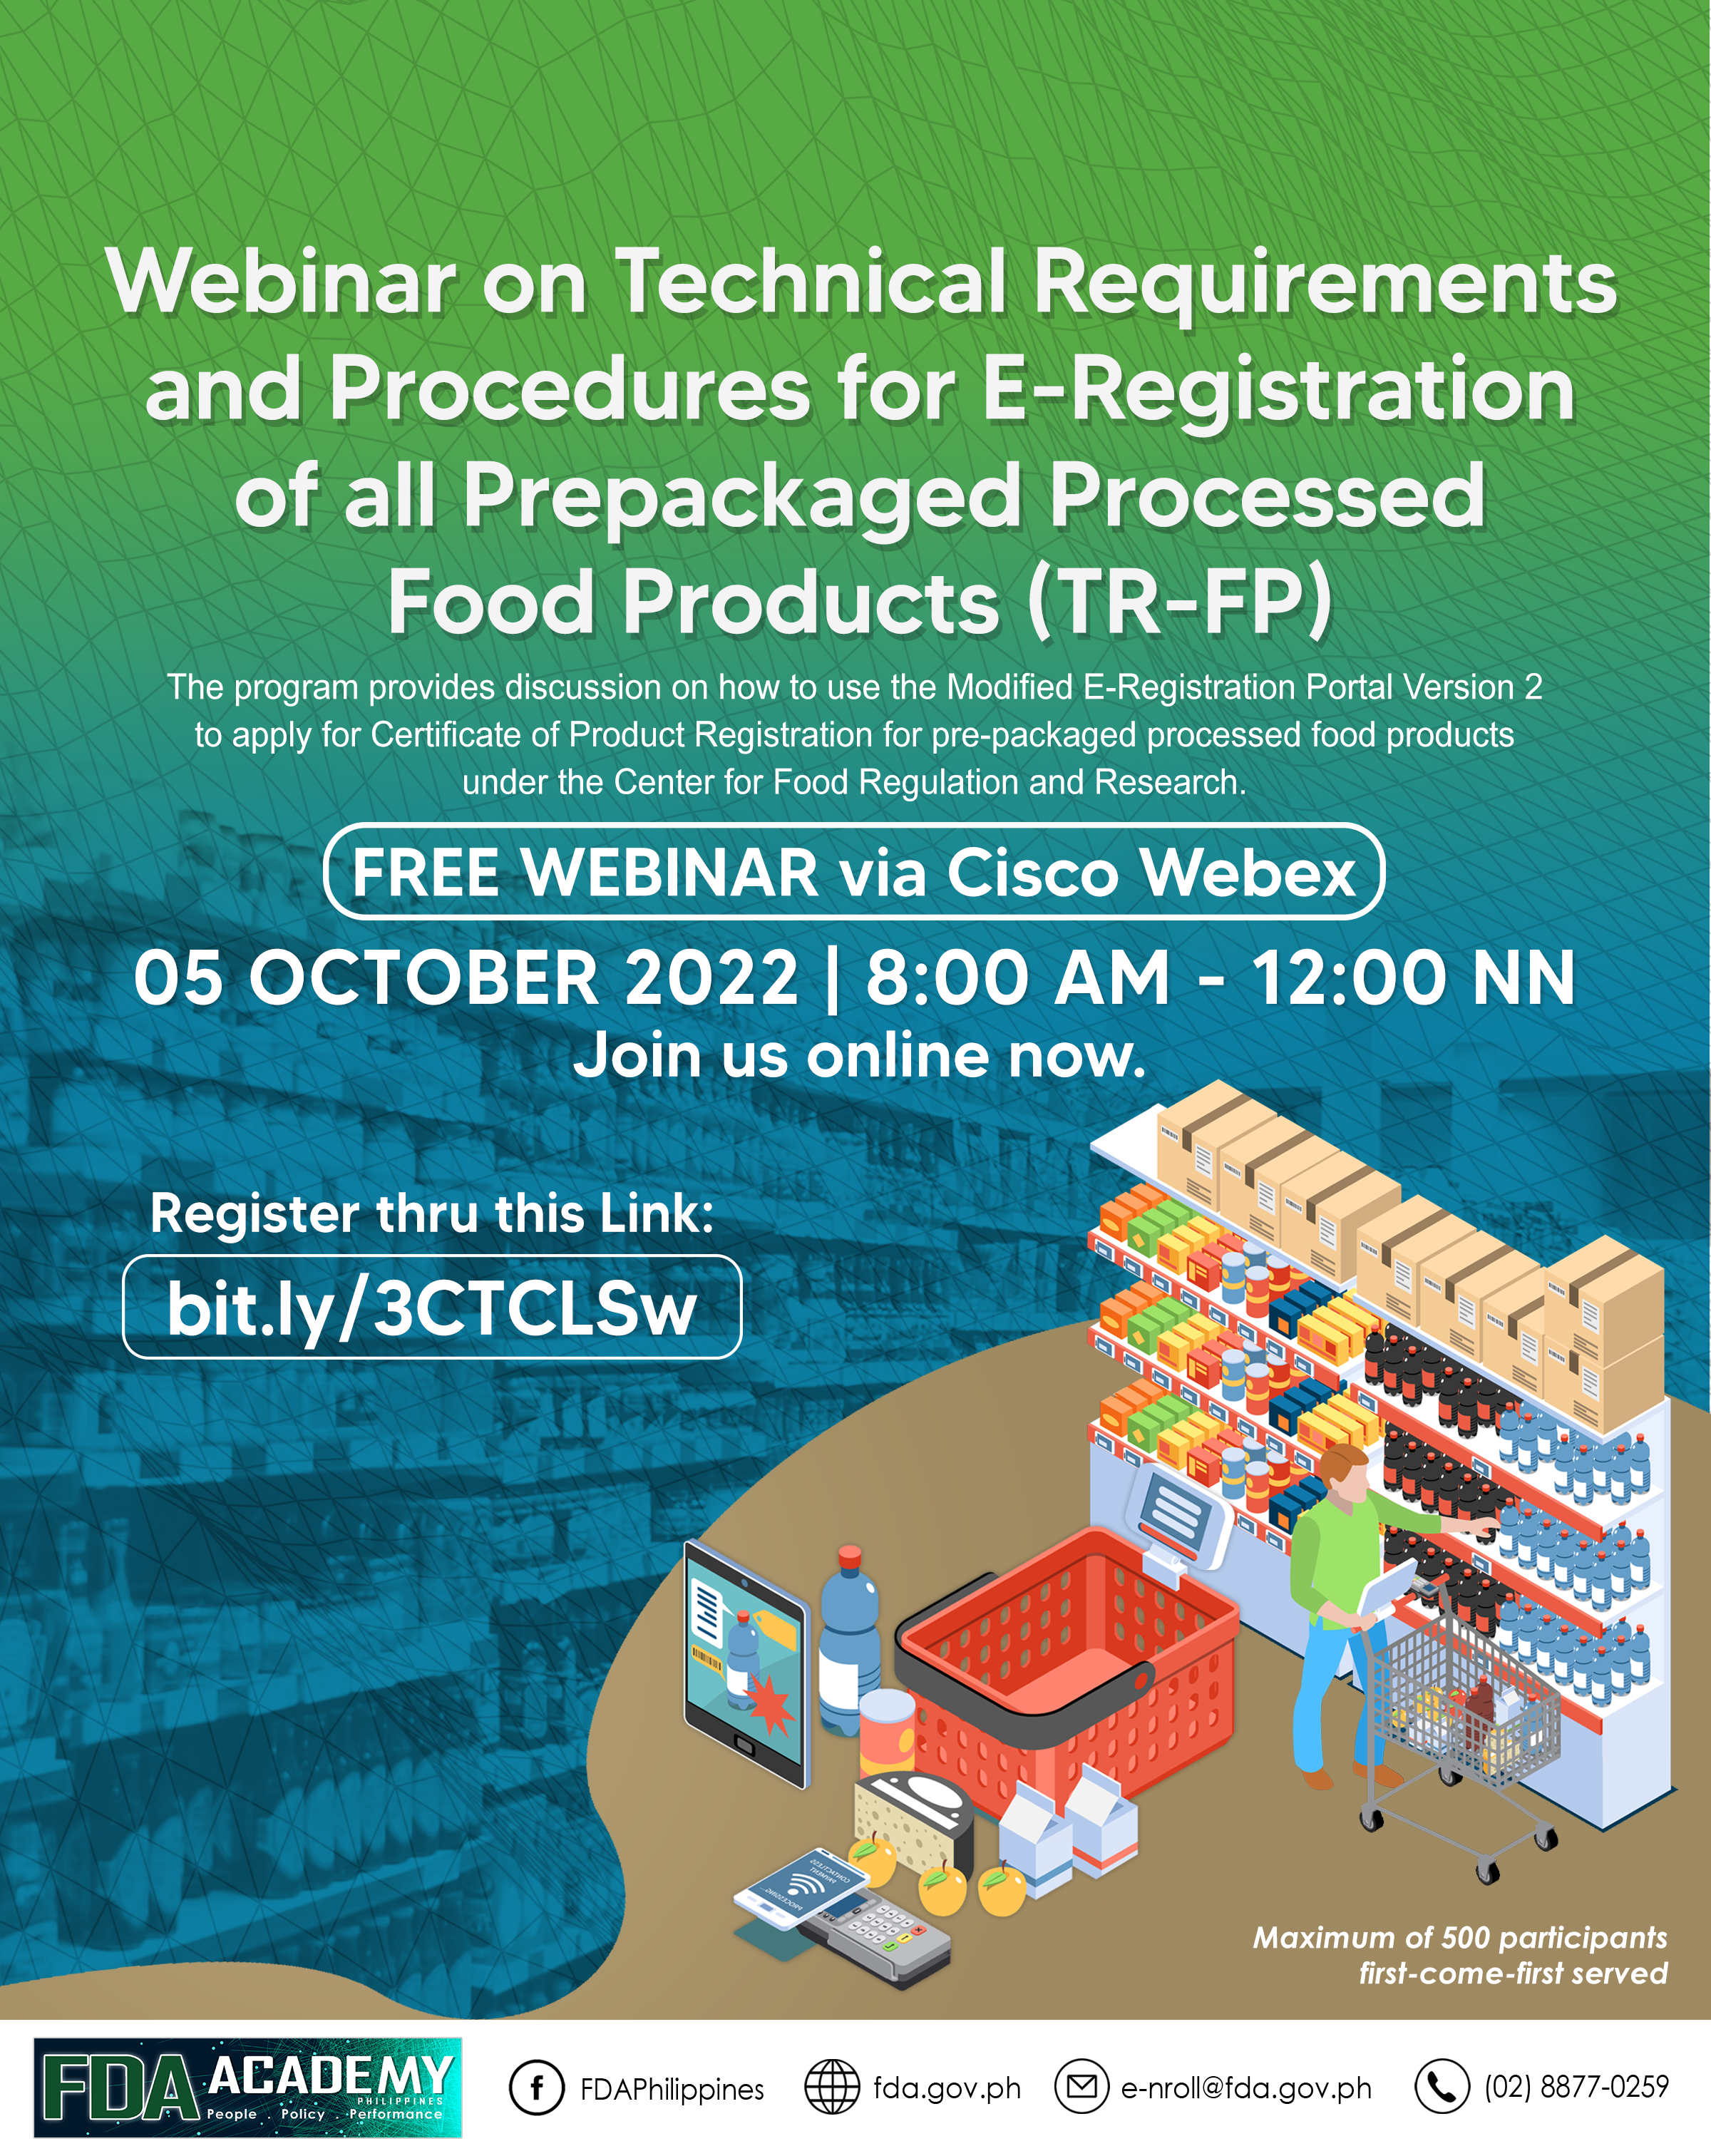 Announcement || WEBINAR ON TECHNICAL REQUIREMENTS AND PROCEDURE FOR E-REGISTRATION OF ALL PREPACKAGED AND PROCESSED FOOD PRODUCTS (TR-FP)